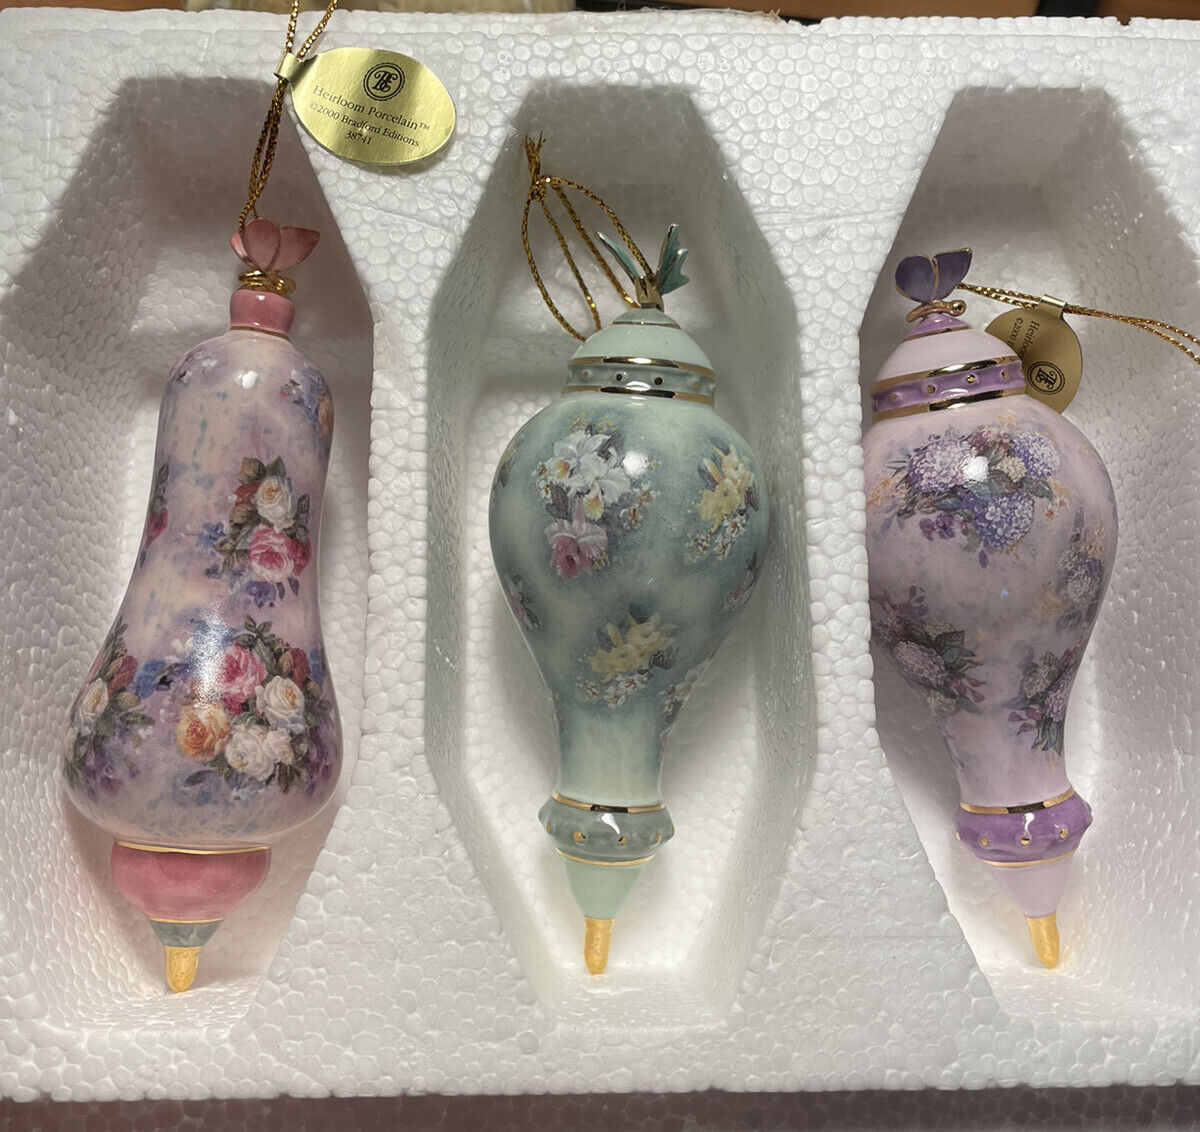 3 Heirloom Porcelain Cherished Chintz Ornament Collection 2000 Bradford Edition